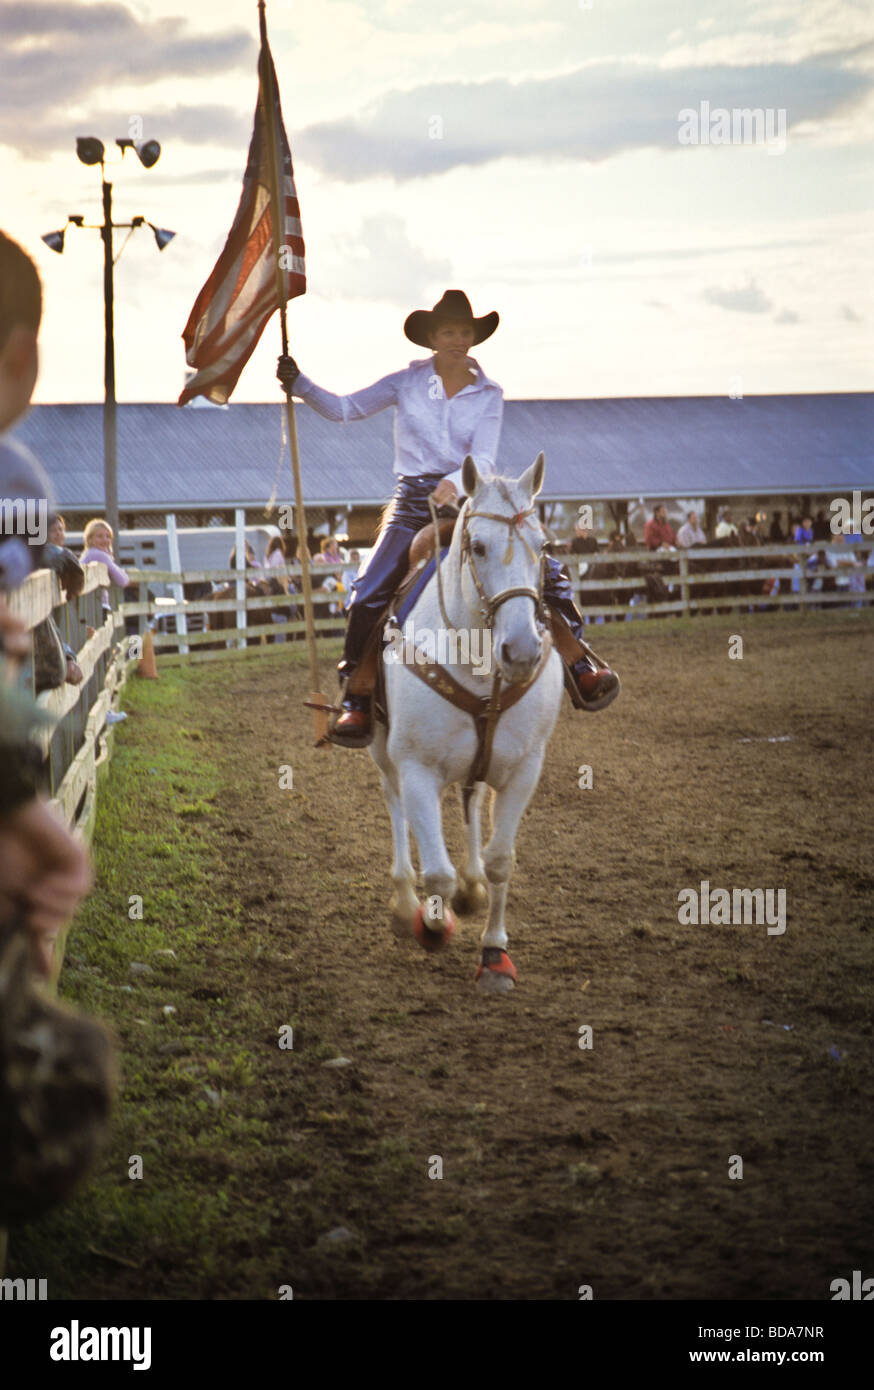 Young woman on white horse carries American flag at opening ceremony of county fair rodeo Stock Photo